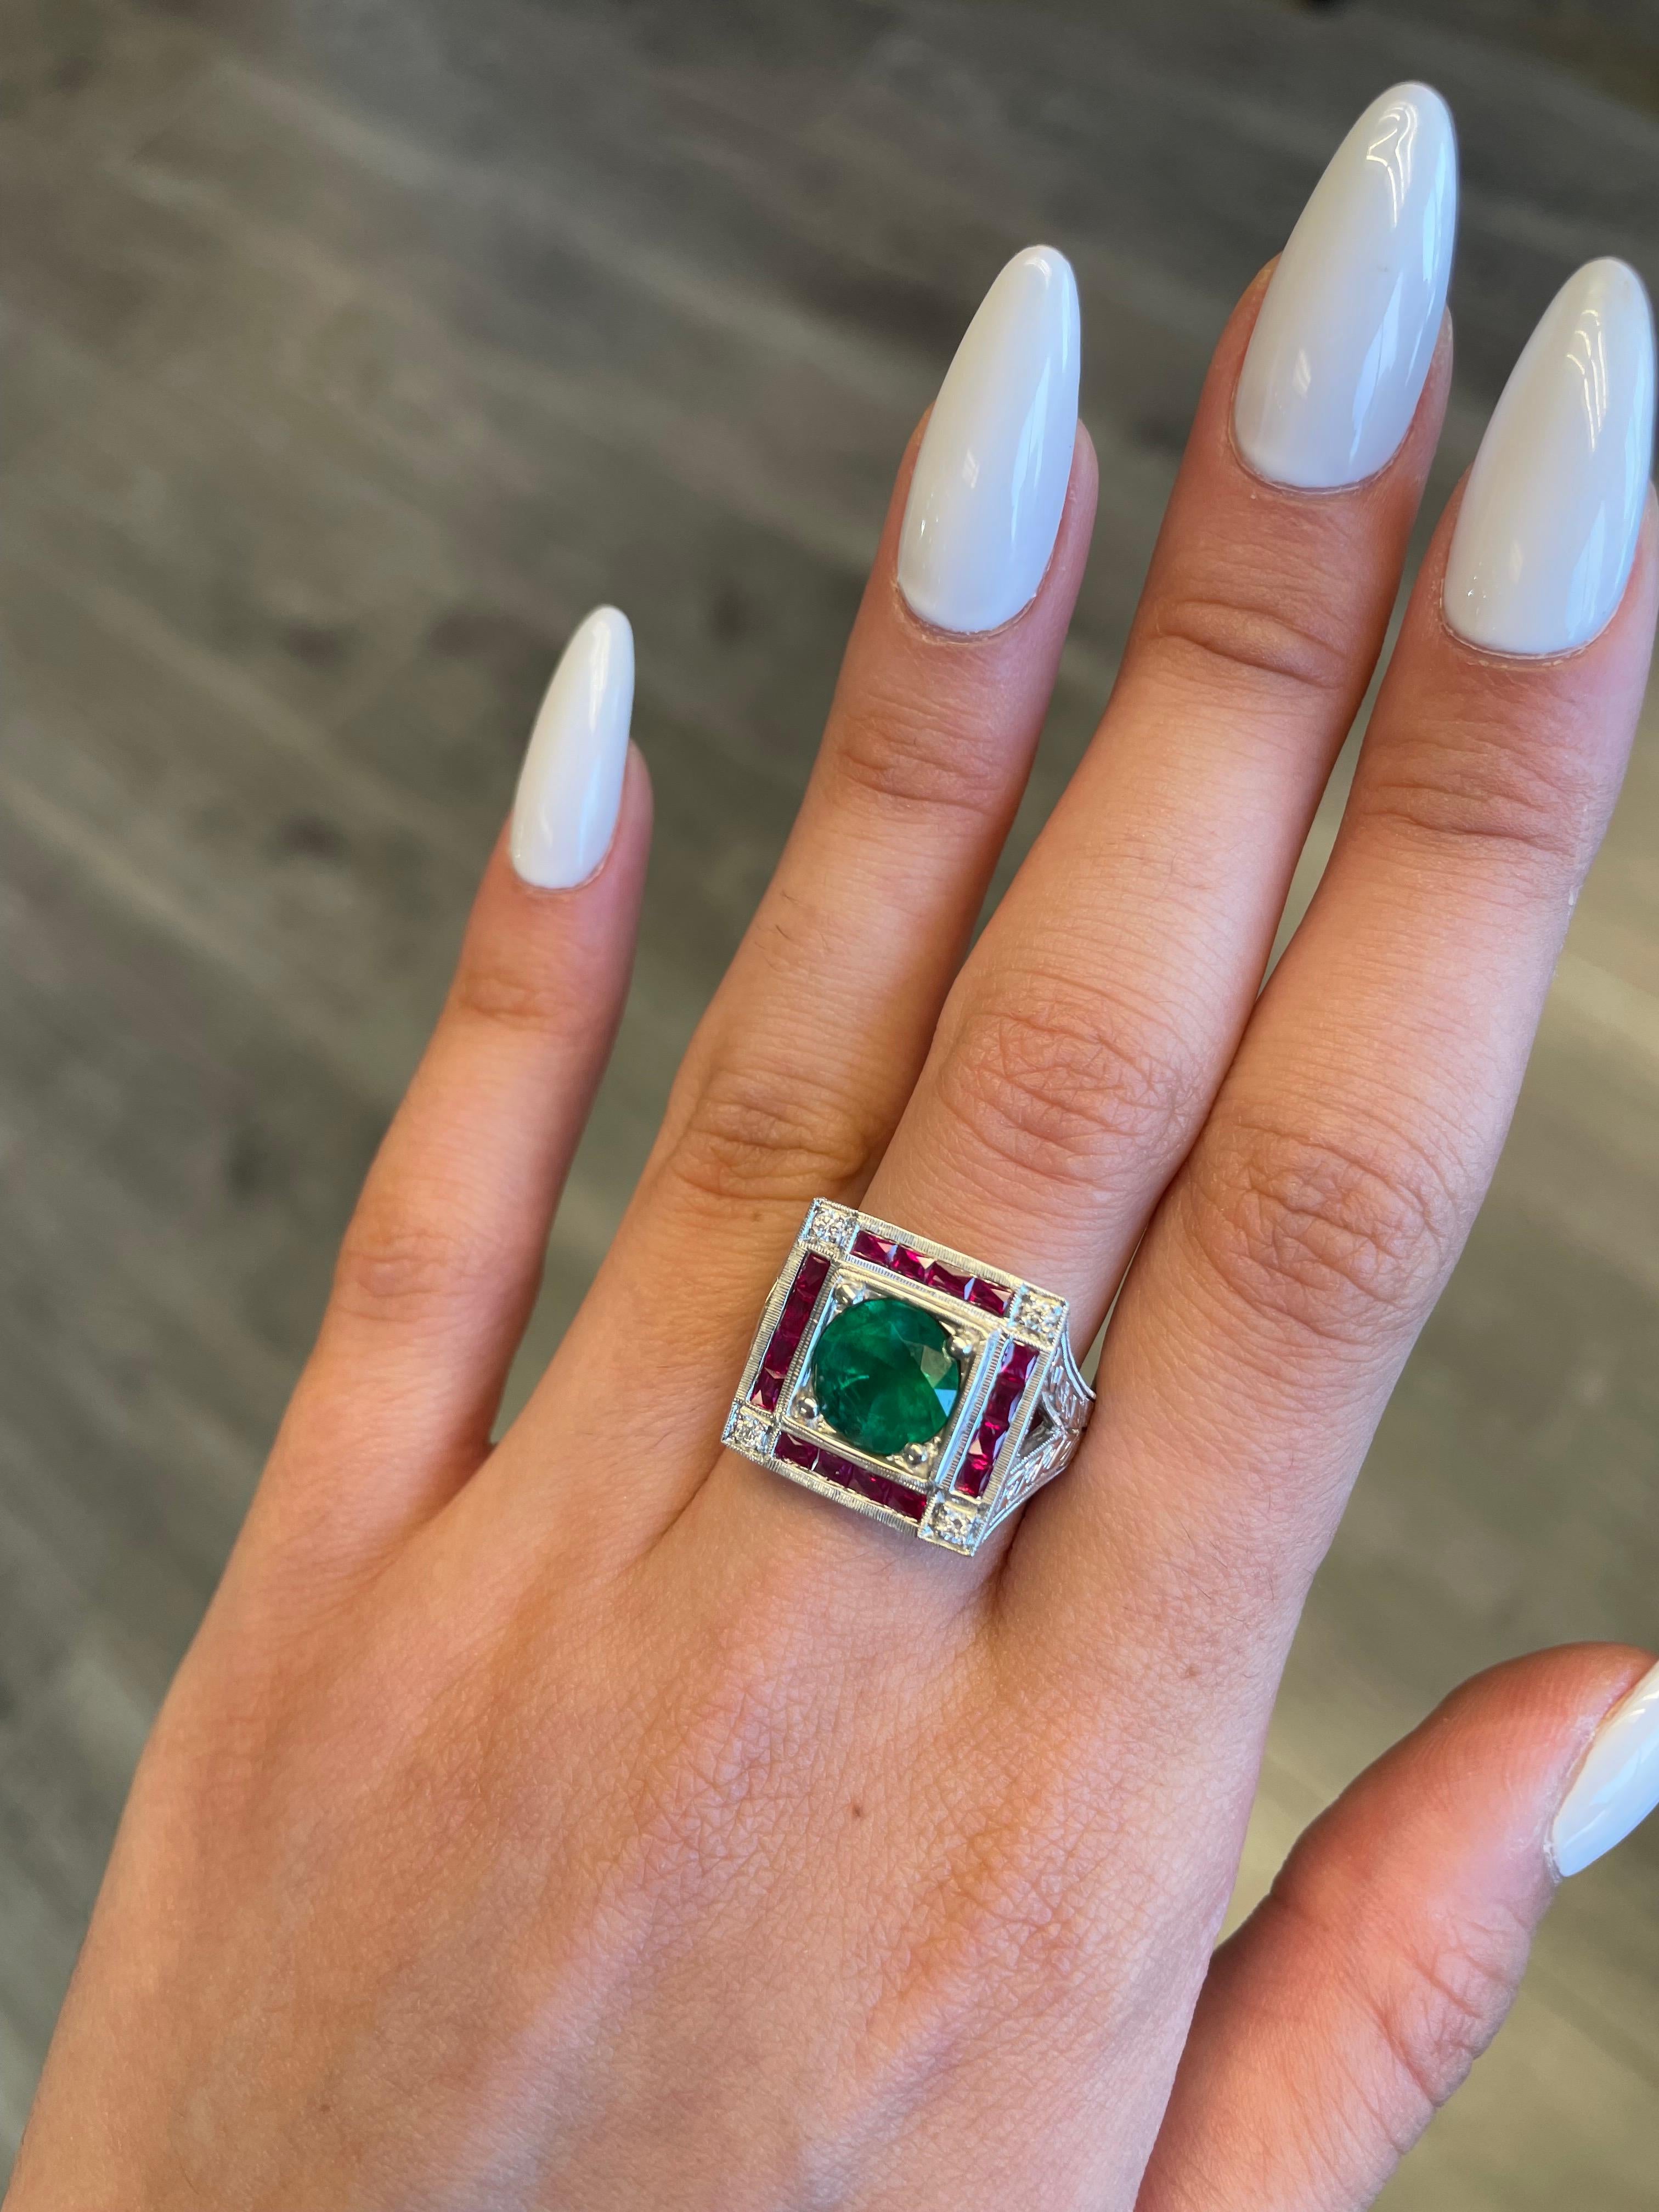 Lovely vintage inspired emerald with sapphires and diamond ring.
2.88 carat round emerald apx F2 complimented with 1.20ct of french cut rubies heat and 0.10ct of round brilliant diamonds. Approximately G/H color and SI clarity. 18-karat white gold